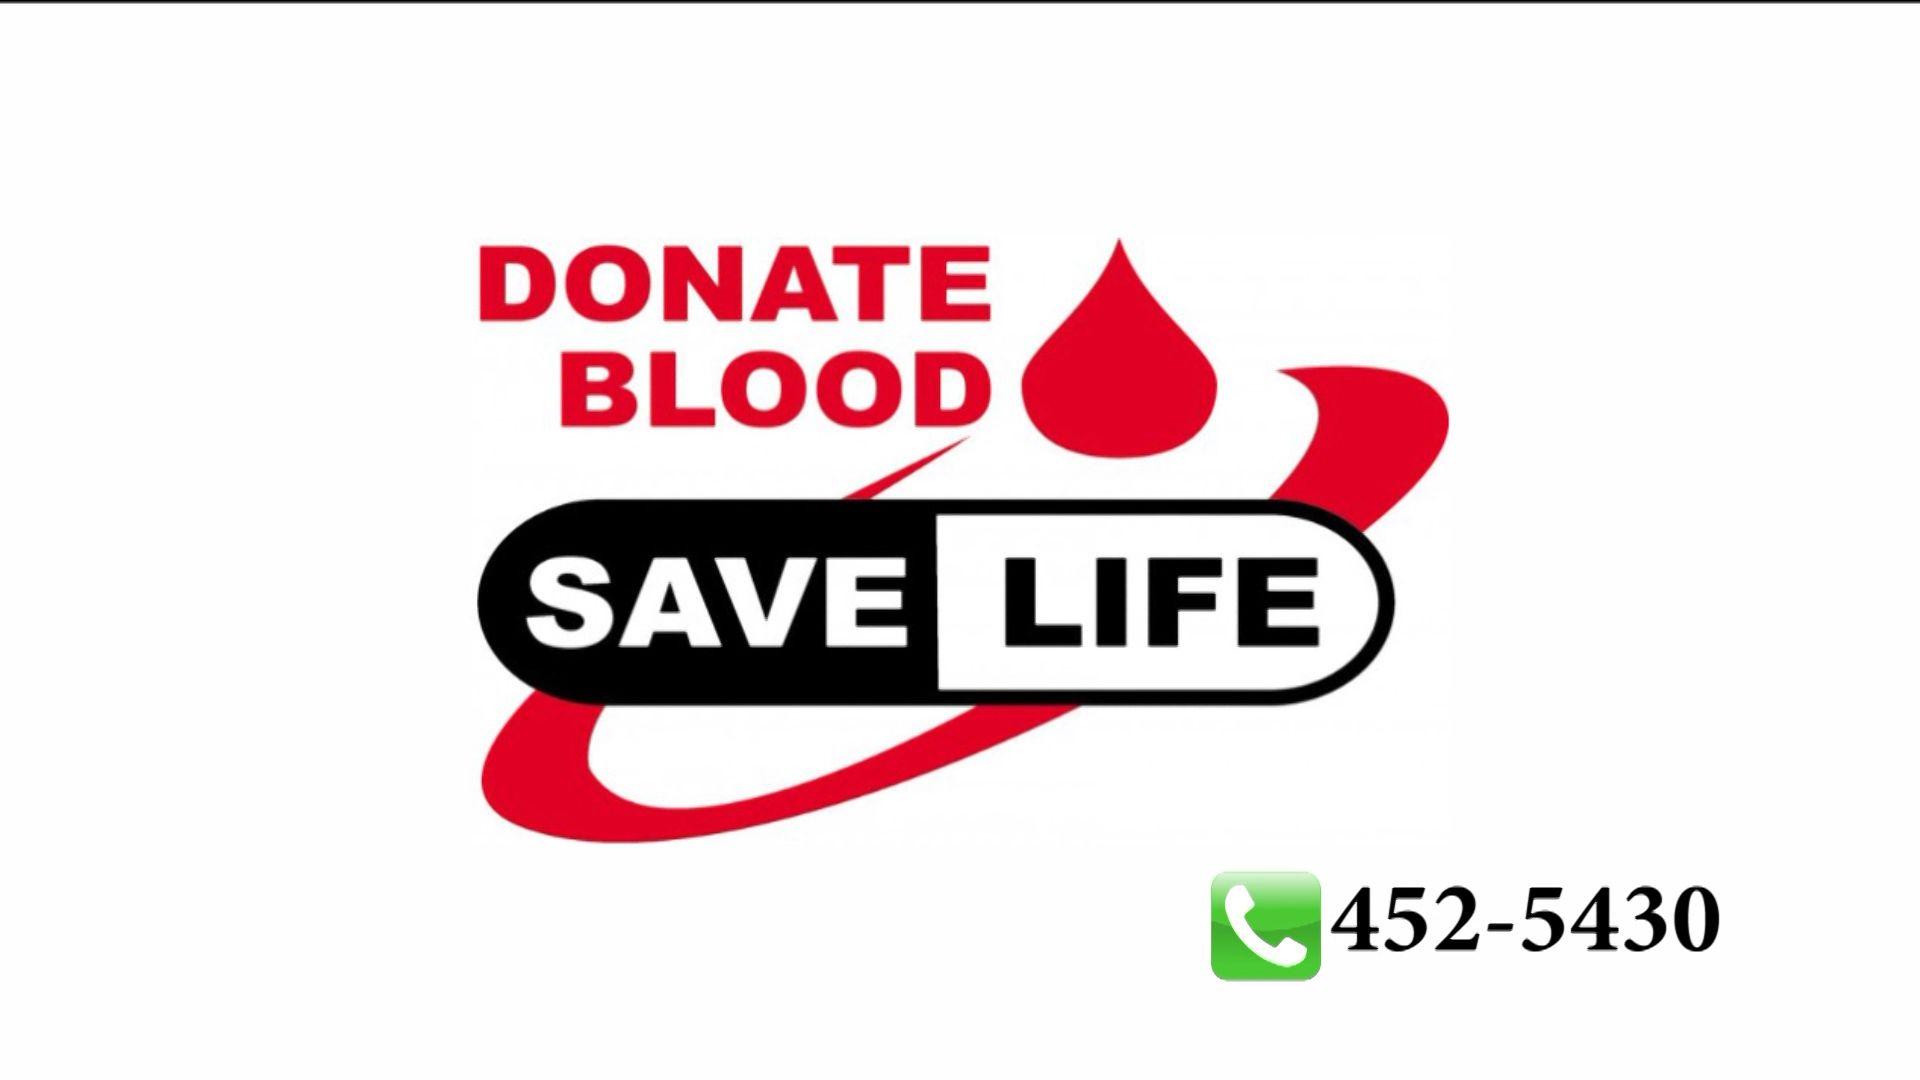 Donate Blood Save Life Logo - St. Lucia Blood Bank still low on blood supply and blood products